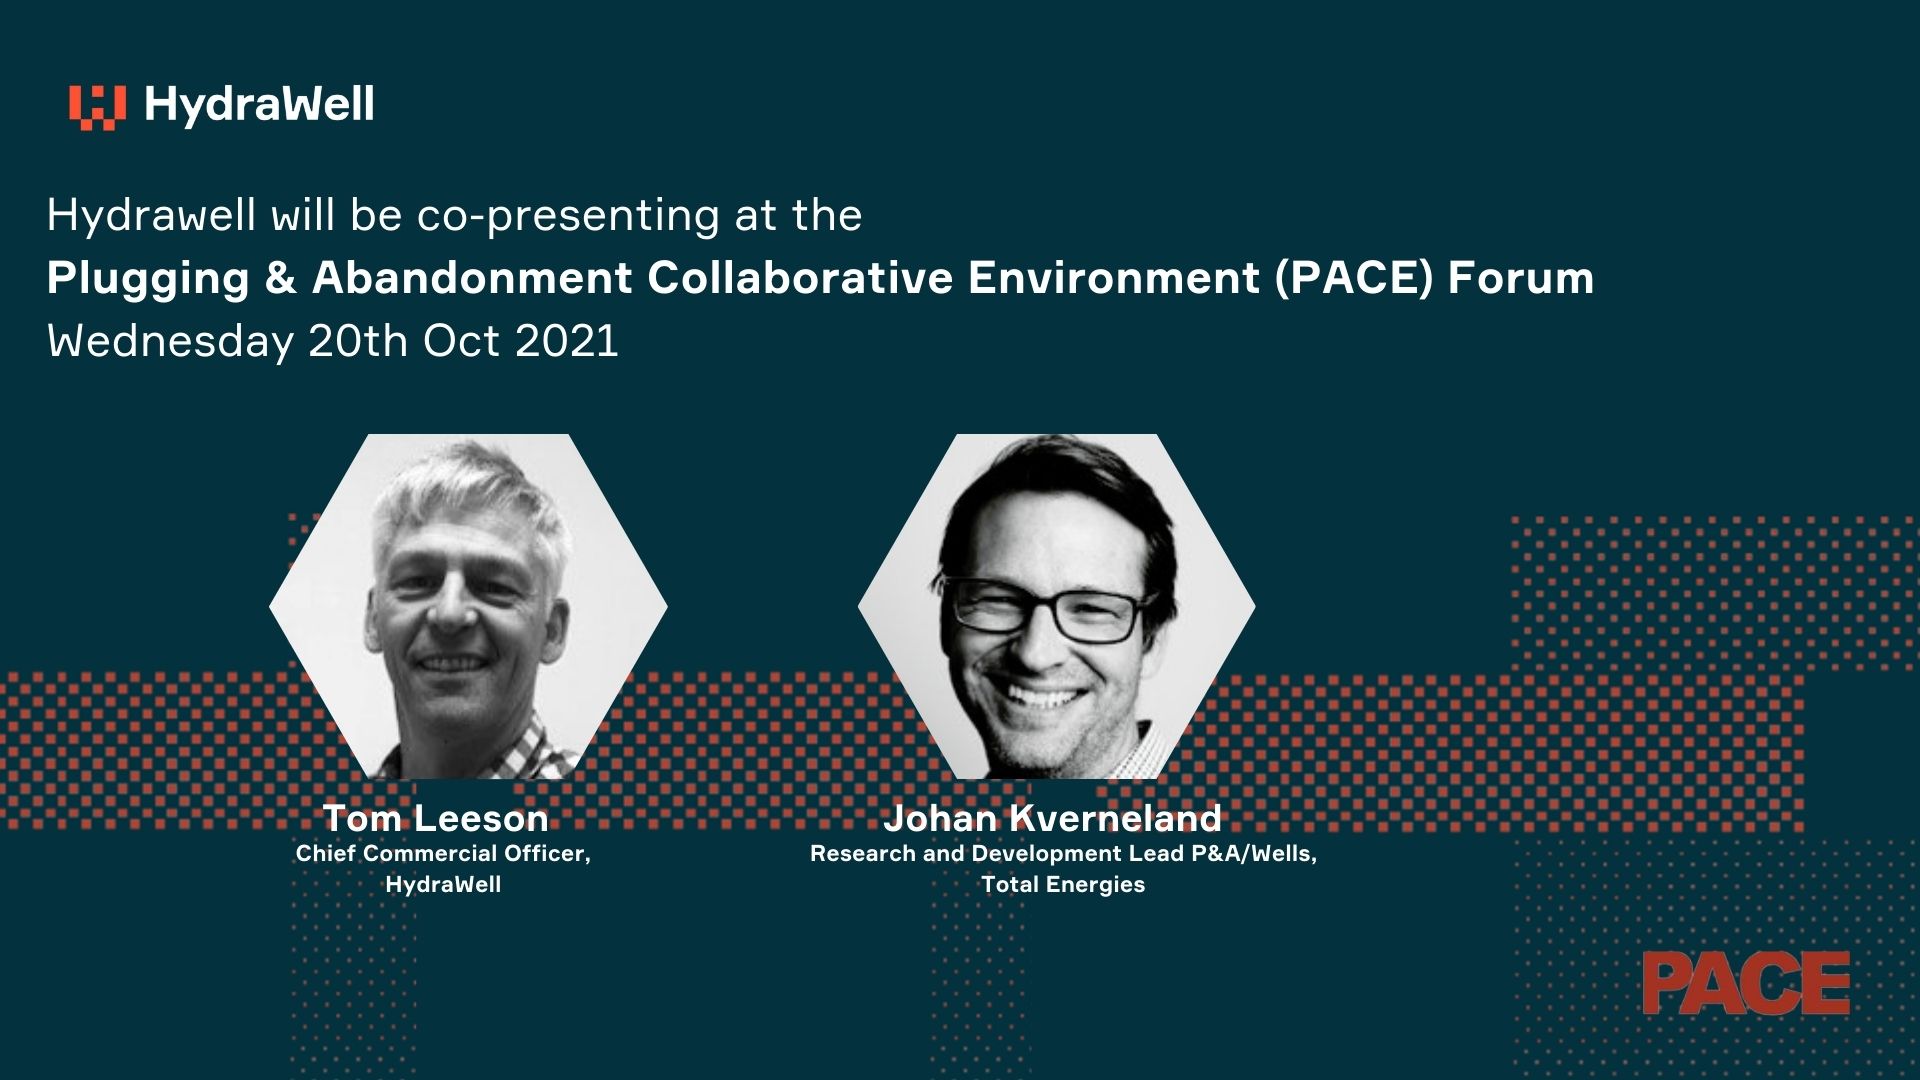 HydraWell’s Chief Commercial Officer Tom Leeson to Co-Present at PACE Forum